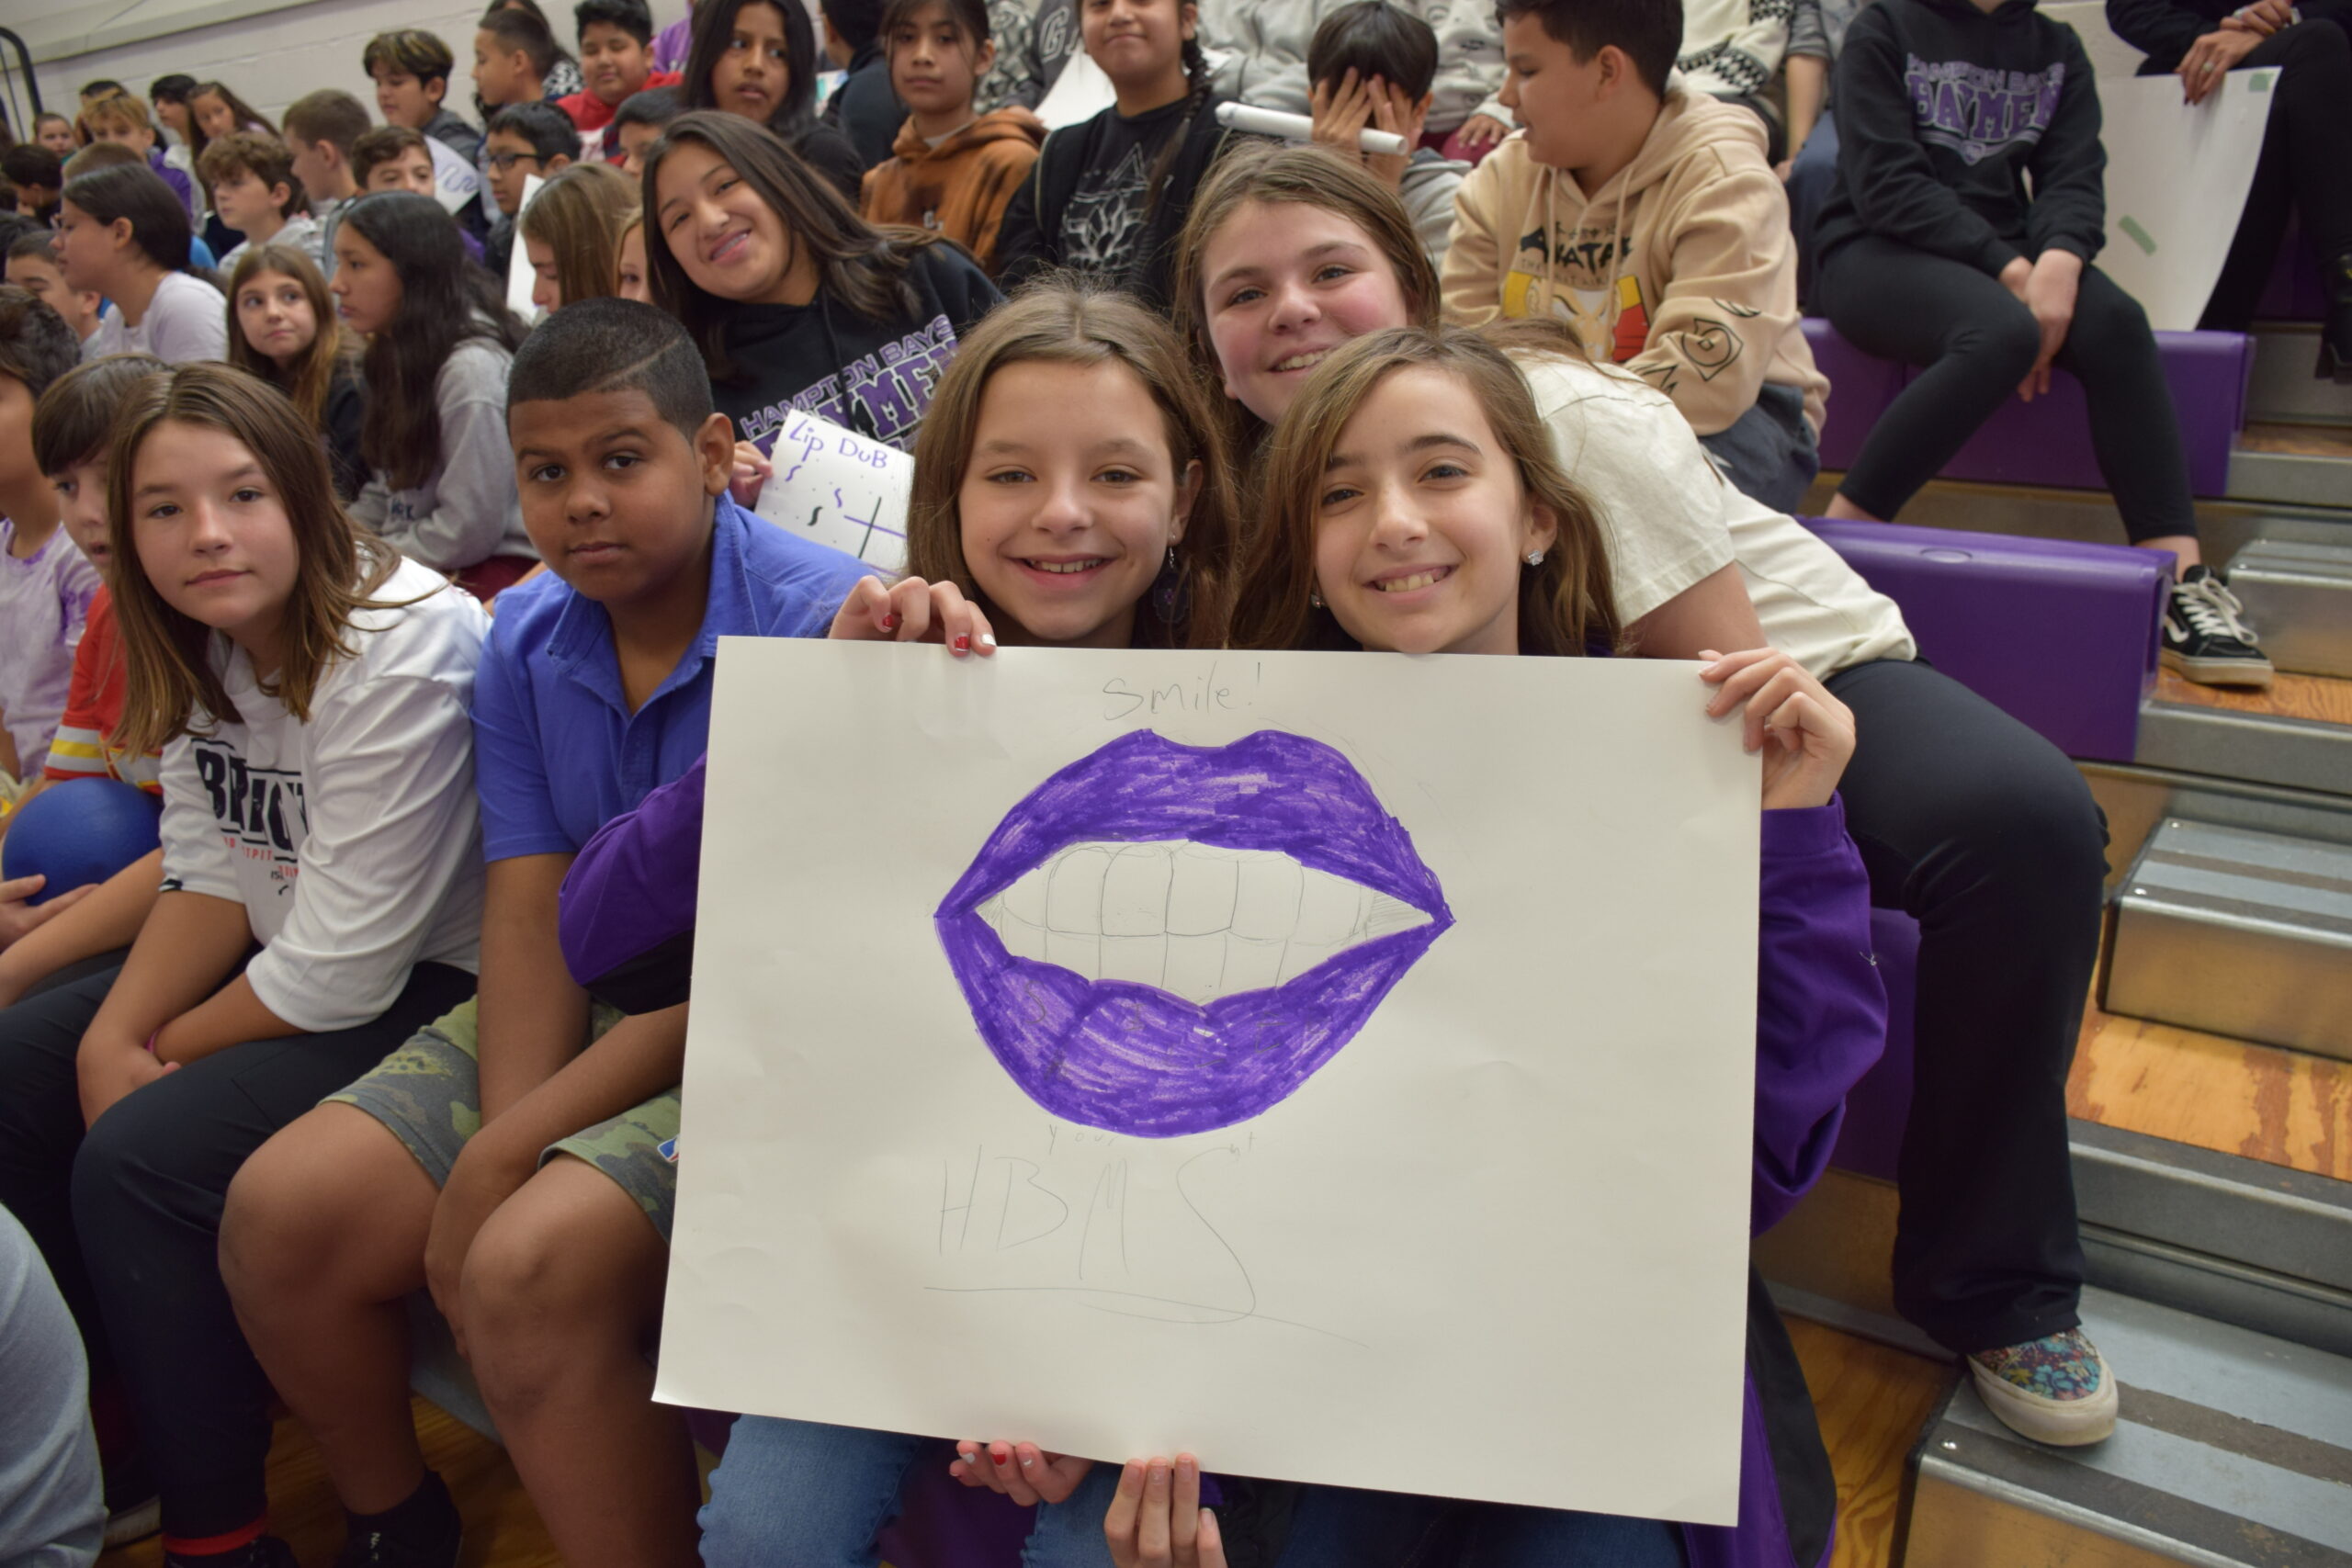 To foster unity at Hampton Bays Middle School, students and staff worked together to create a lip dub music video on November 22. Wearing purple, students lined their school’s hallways with signs and performed acts and dances while lip syncing to music as a camera passed them. This is the first time the school has come together for its traditional lip dub since the COVID-19 pandemic. The video is available for viewing on youtube.com. COURTESY HAMMPTON BAYS SCHOOL DISTRICT